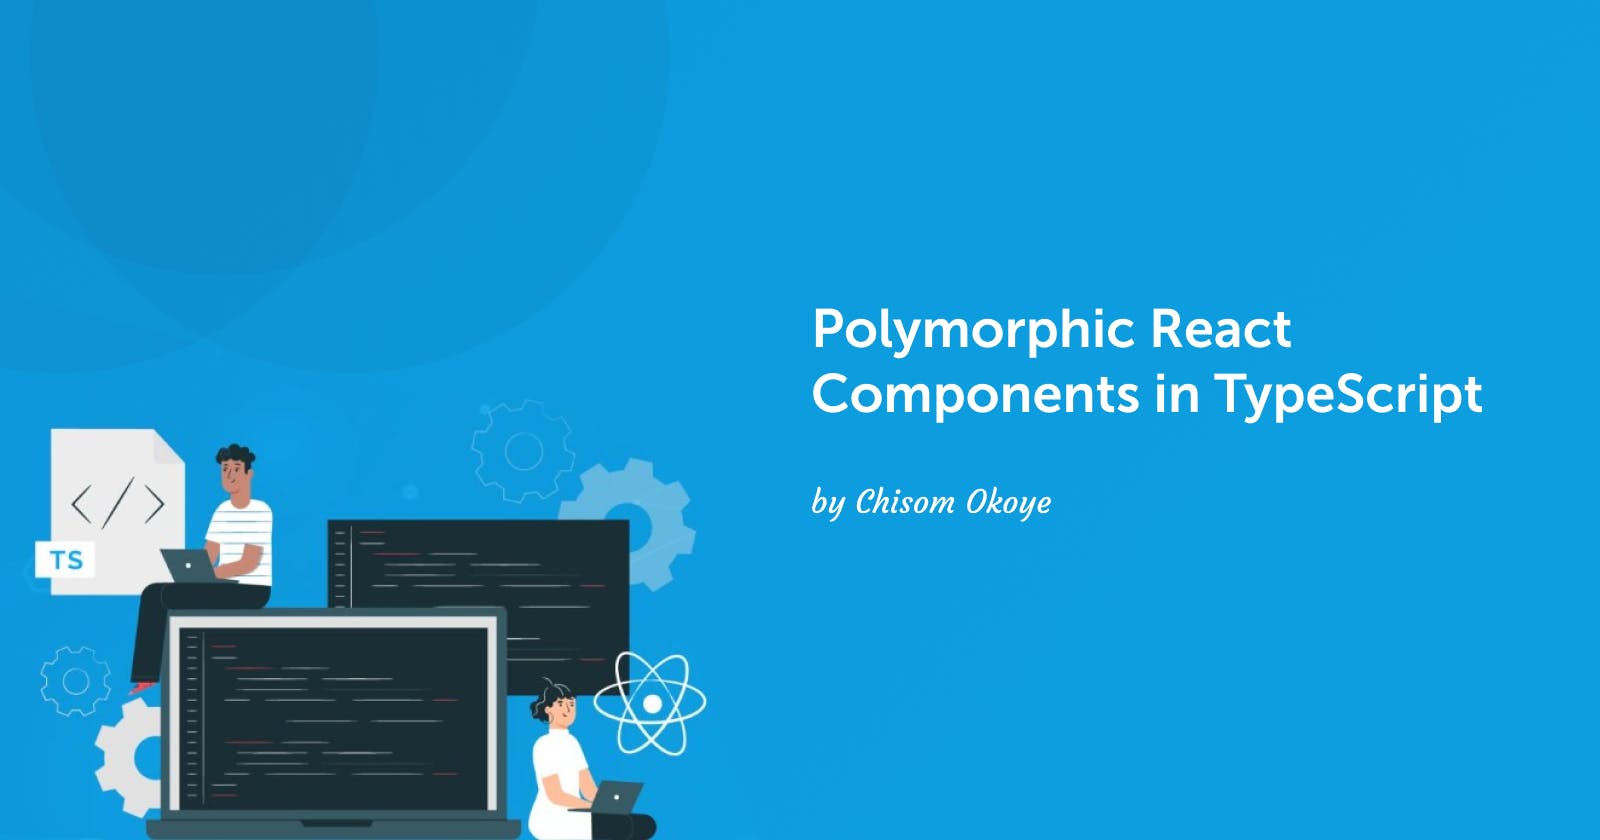 Polymorphic React Components in TypeScript